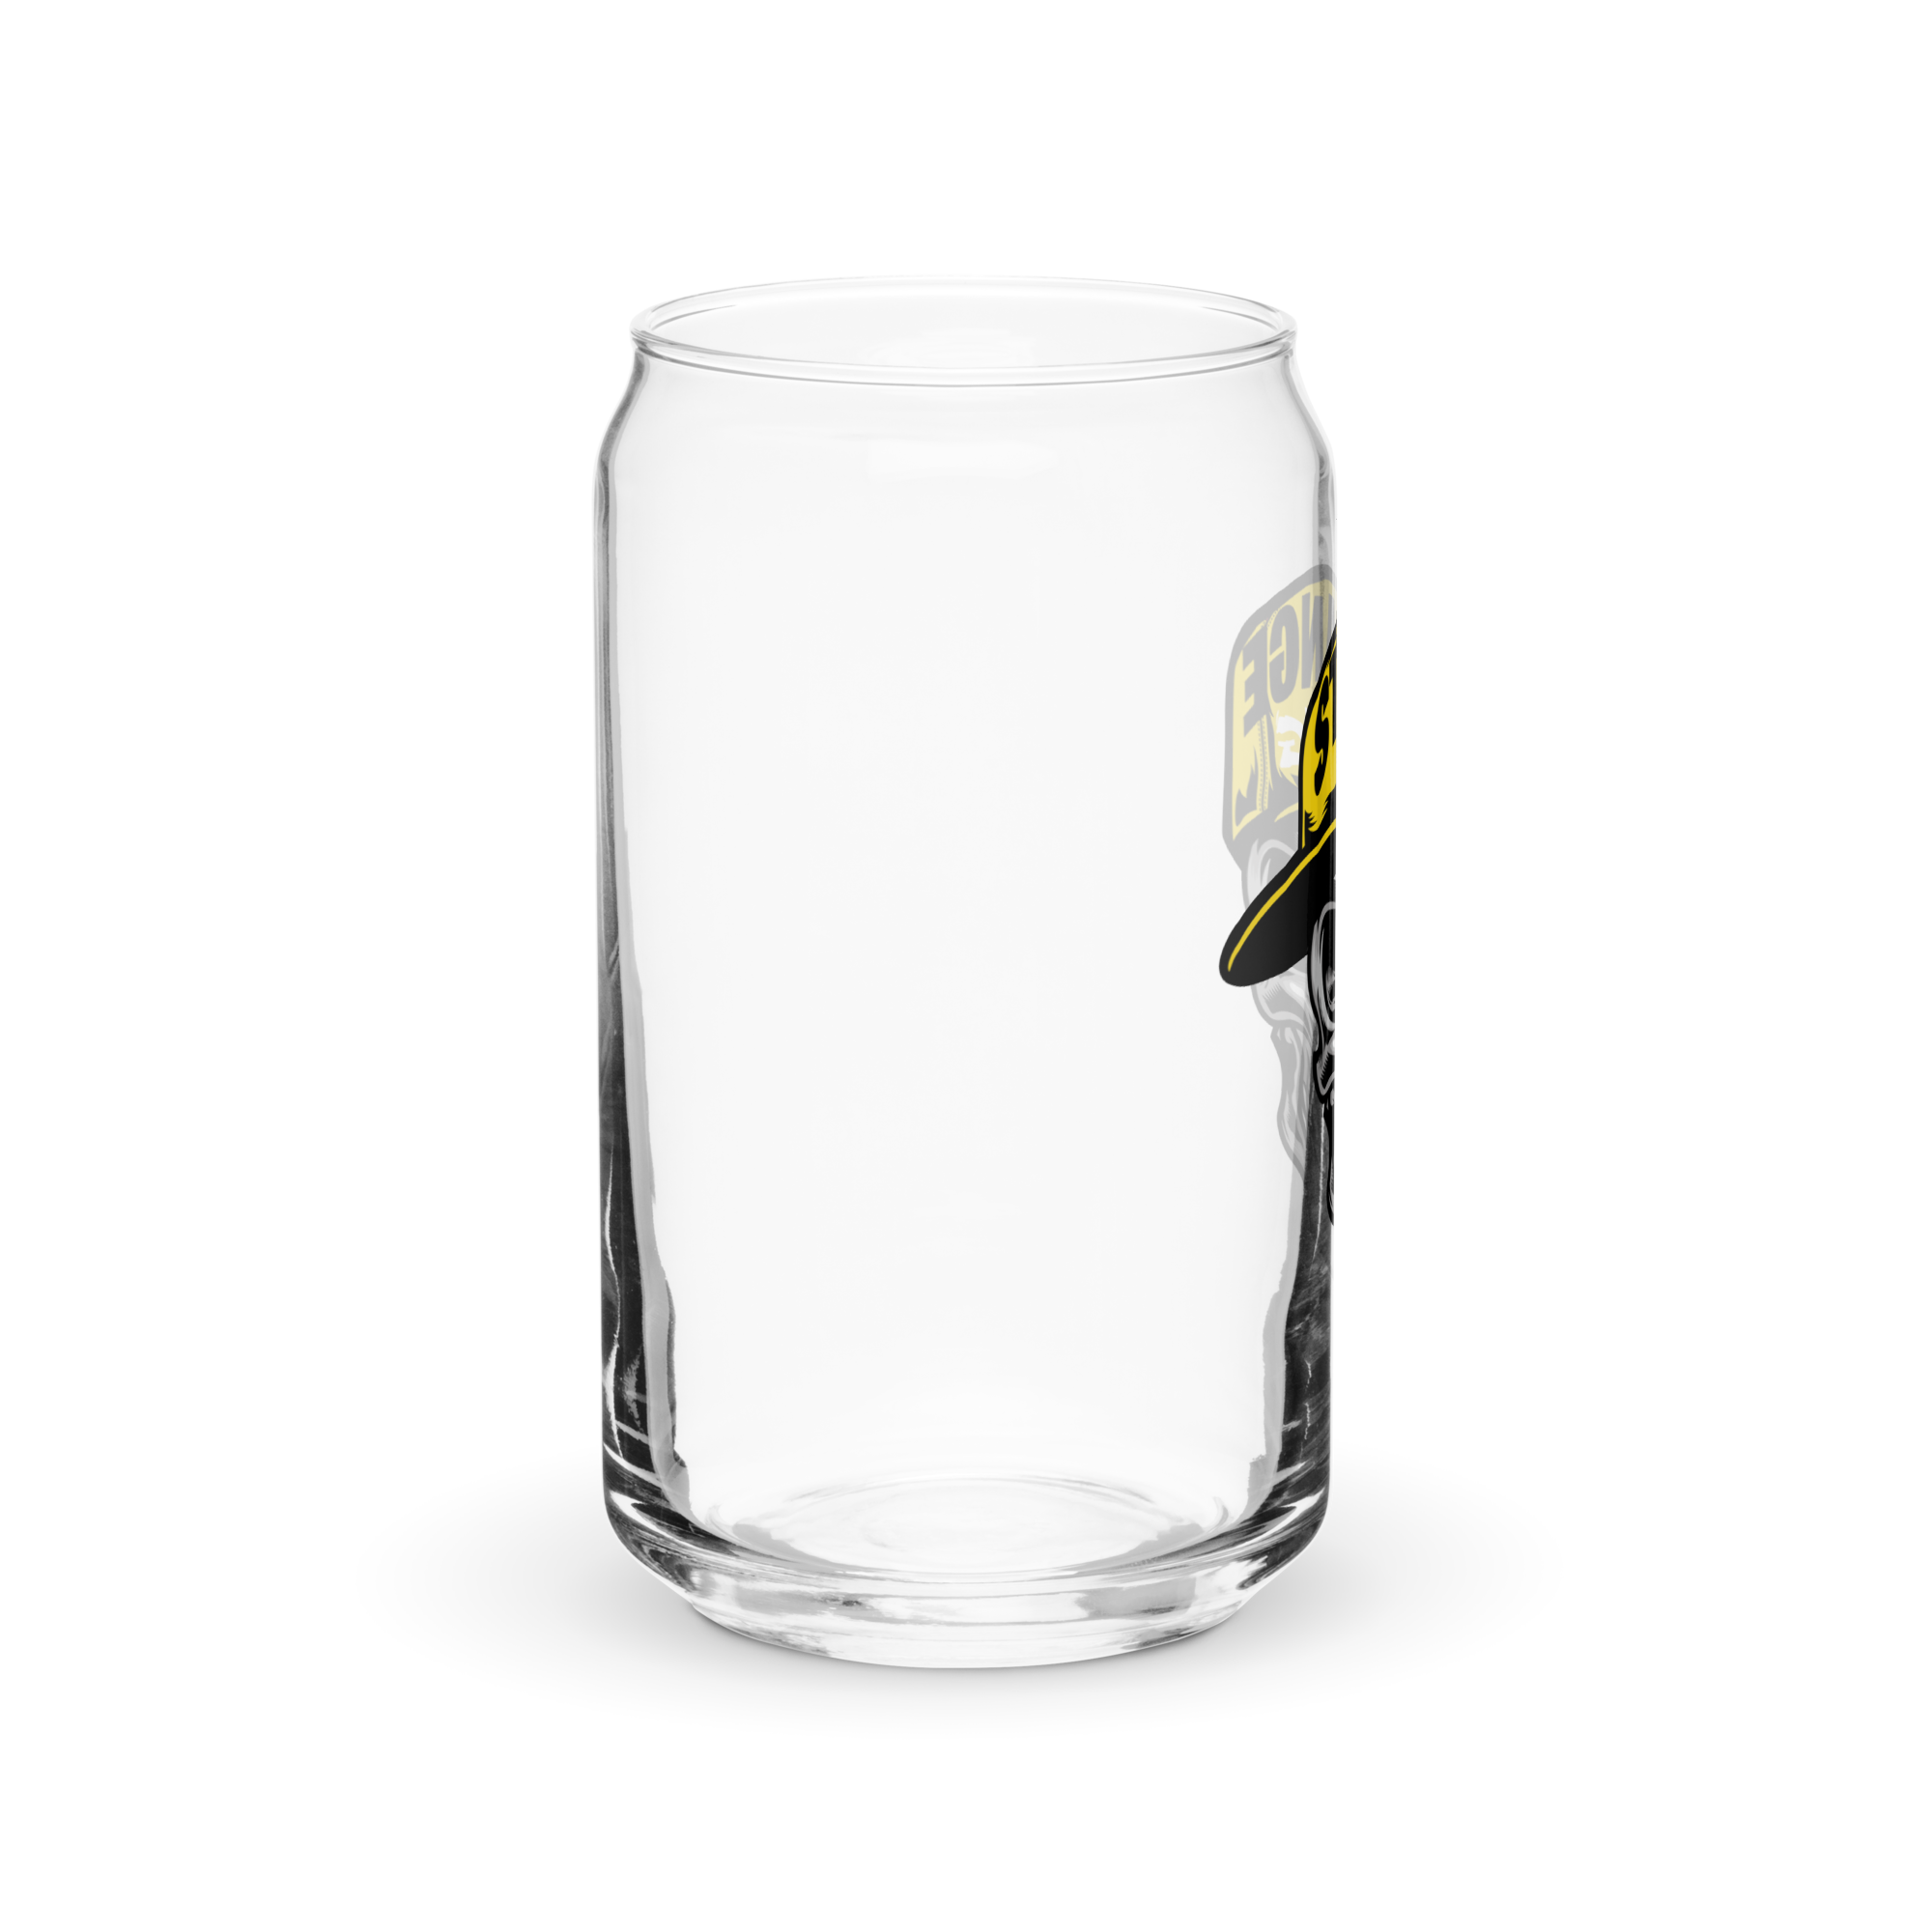 https://strangelevel.com/wp-content/uploads/2023/09/can-shaped-glass-16-oz-right-650255a303abc.png